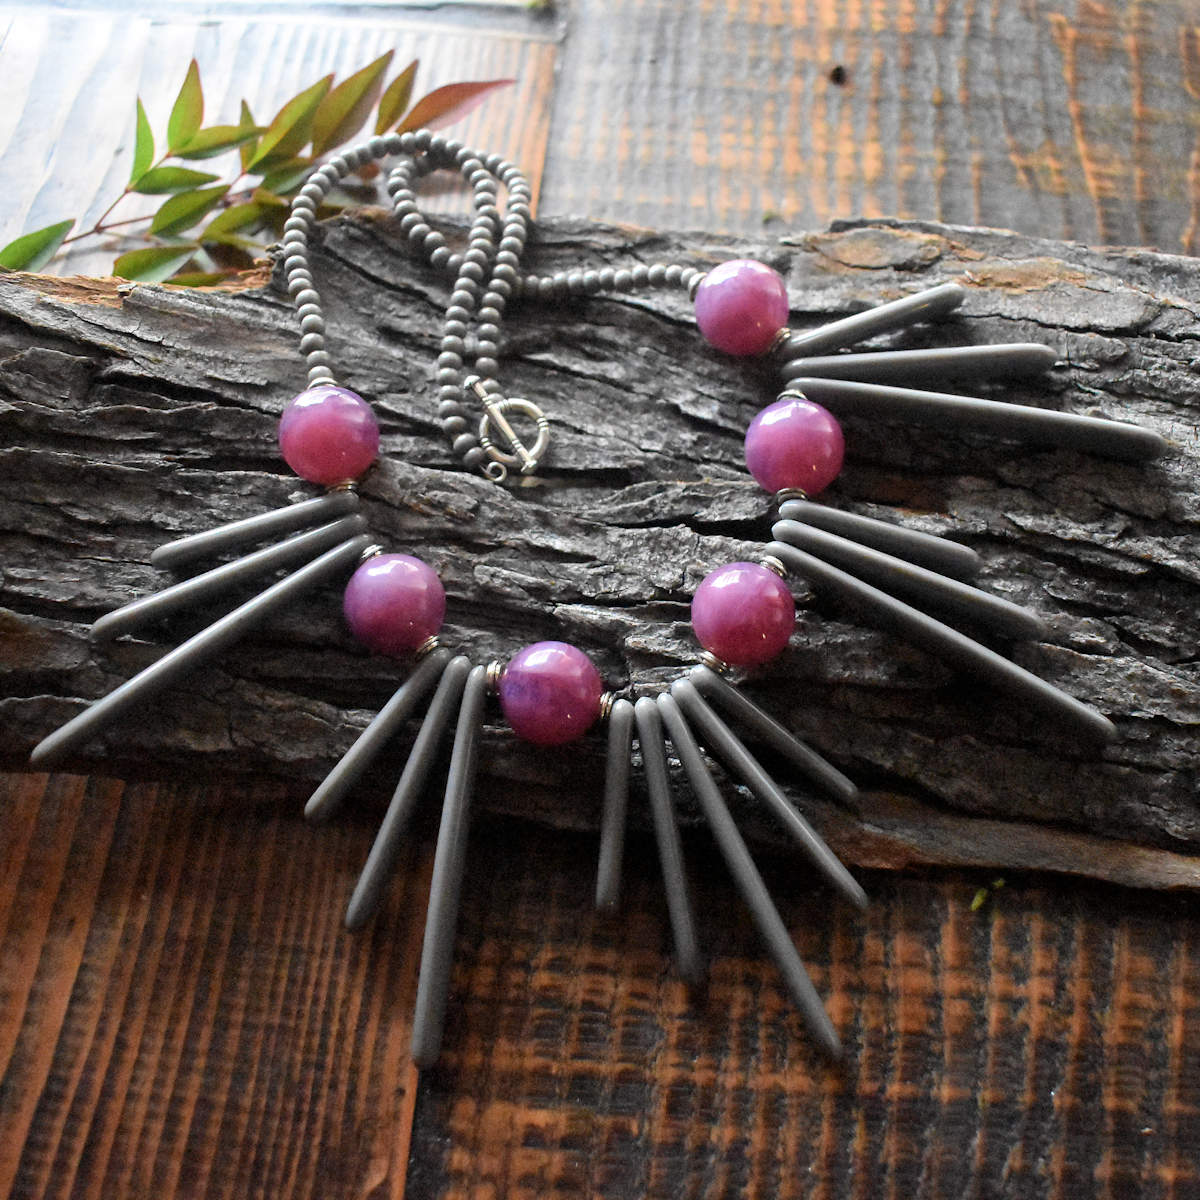 A necklace with gray fringe beads and purple round beads is draped across a wood backdrop. The necklace has five sections of gray spine beads, with the outer two sets grouped in inwardly ascending groups of three and the center section of five spines increasing from shortest at the outer sides to longest in the very center. Six big warm purple beads alternate with the gray sections. The necklace has a silver toggle clasp and smaller gray beads that form the back part of the necklace.